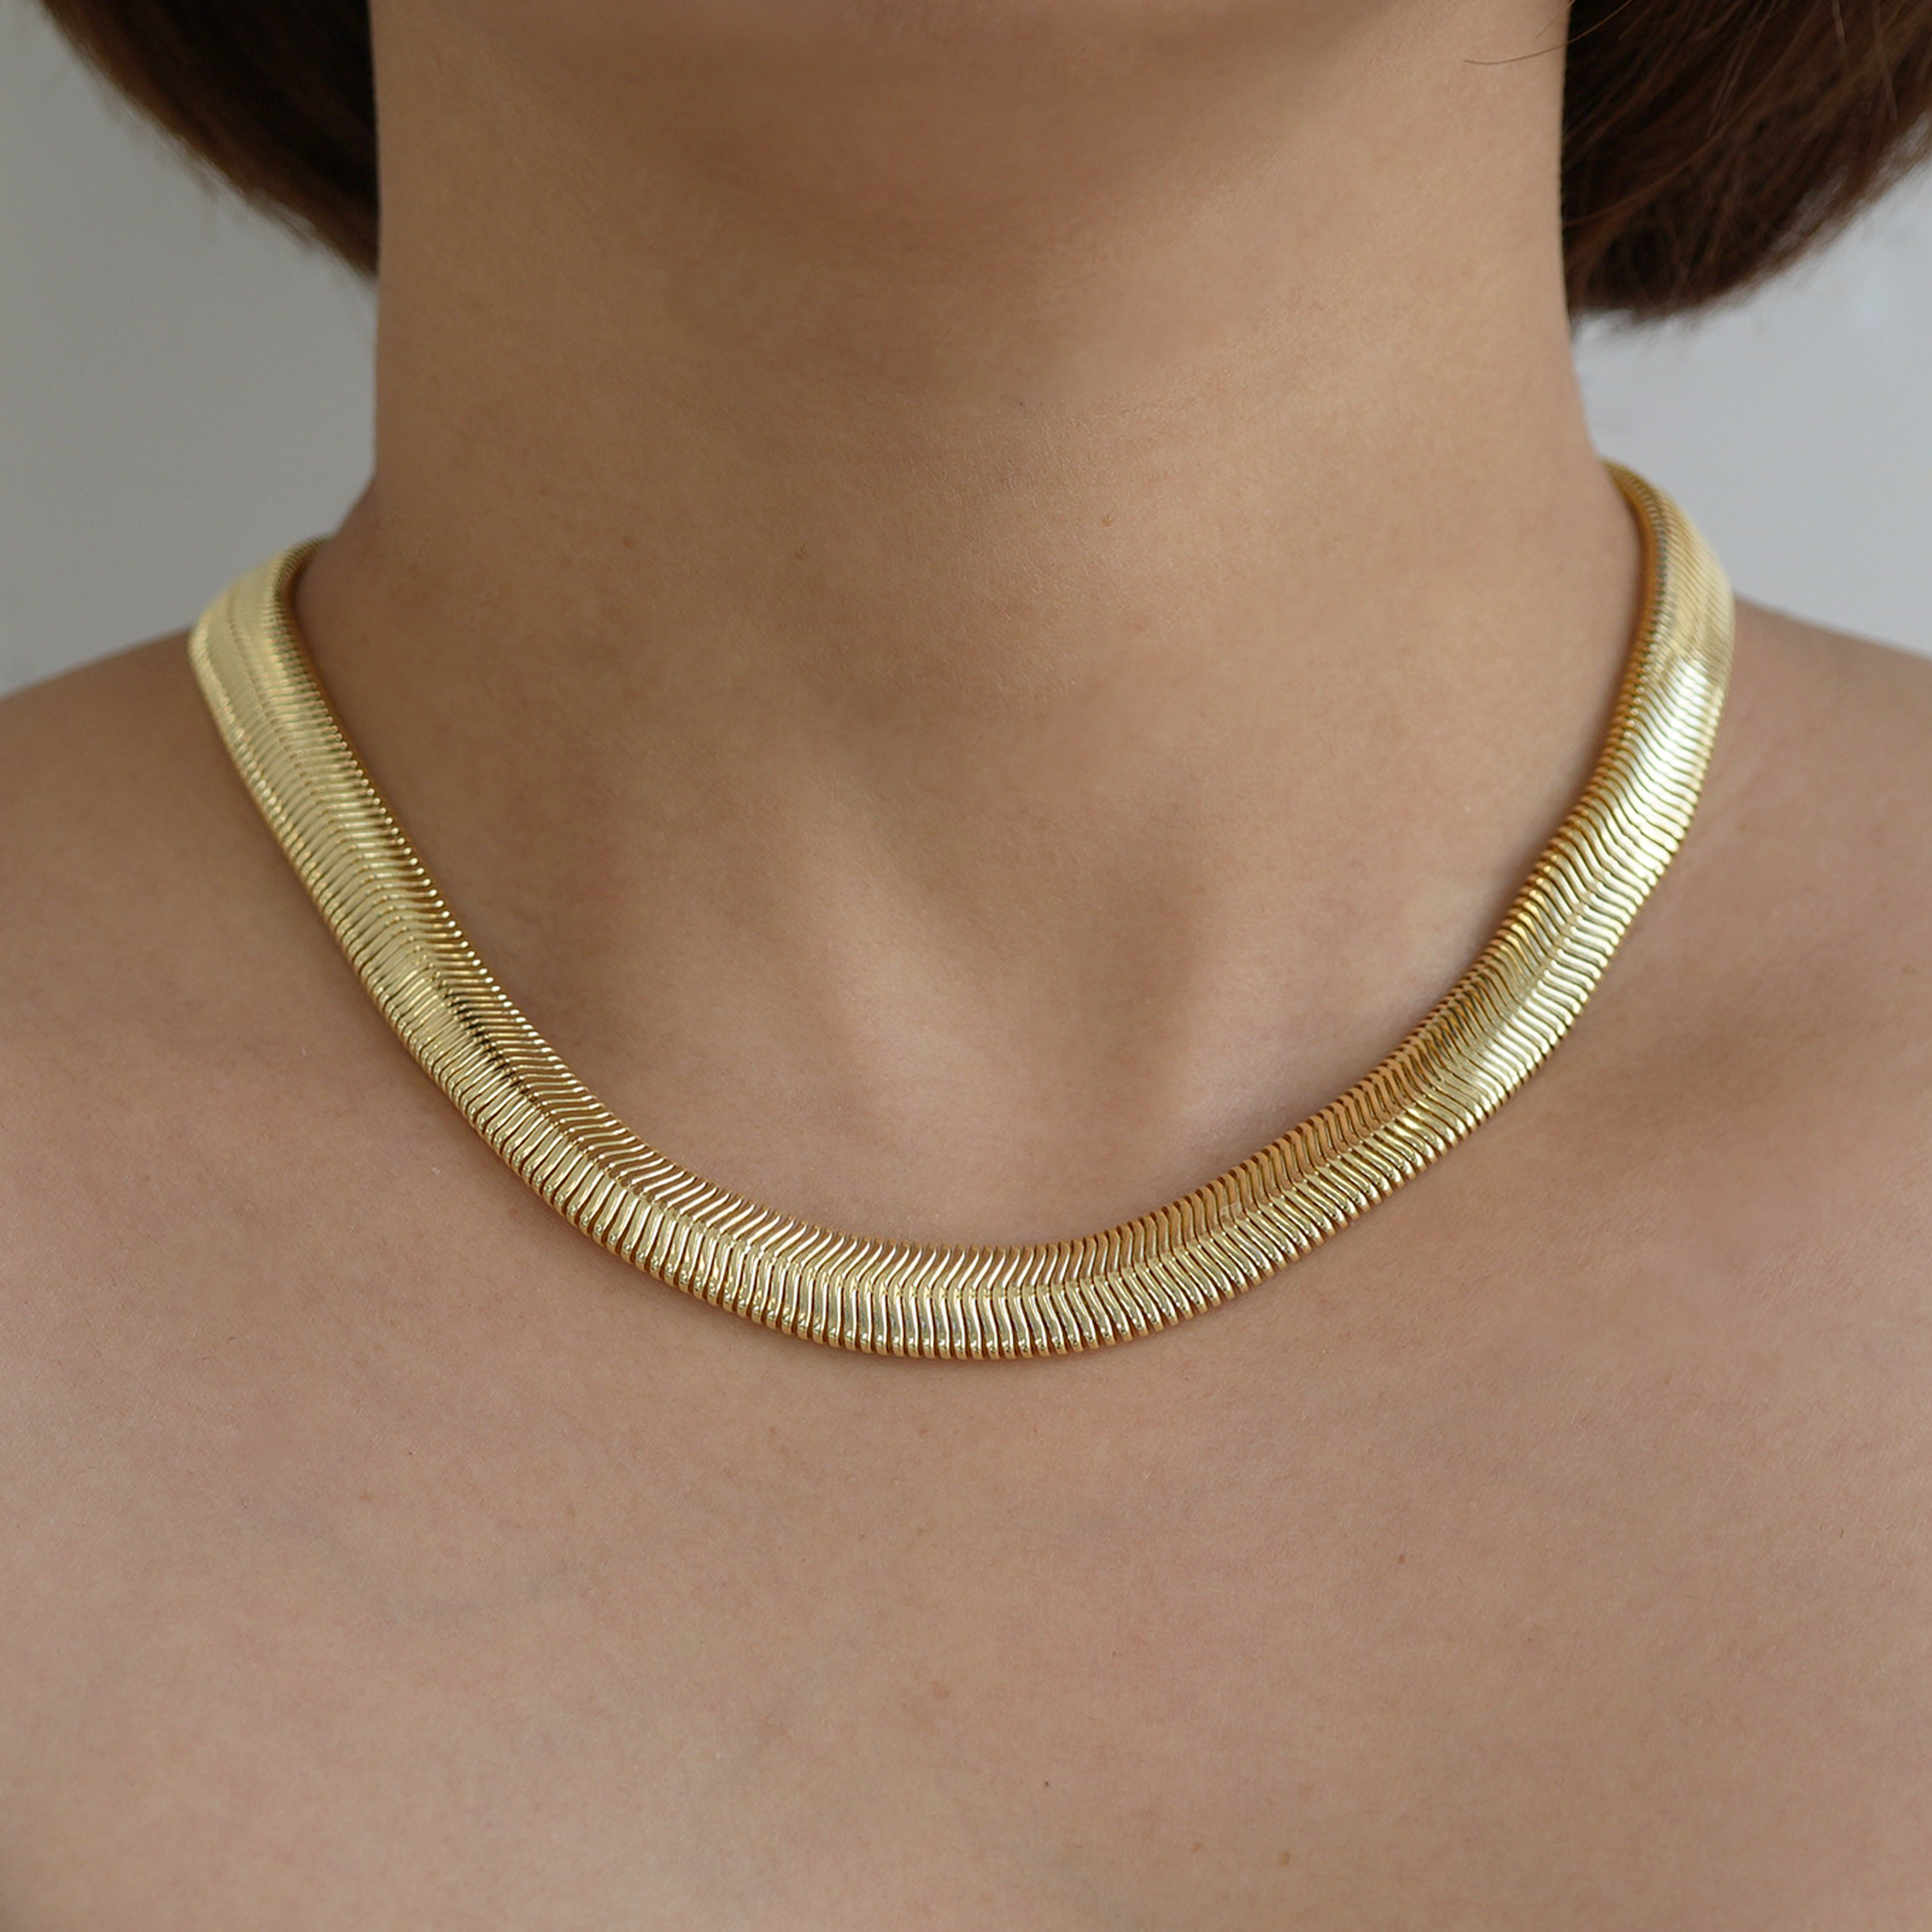 THE ELOISE NECKLACE